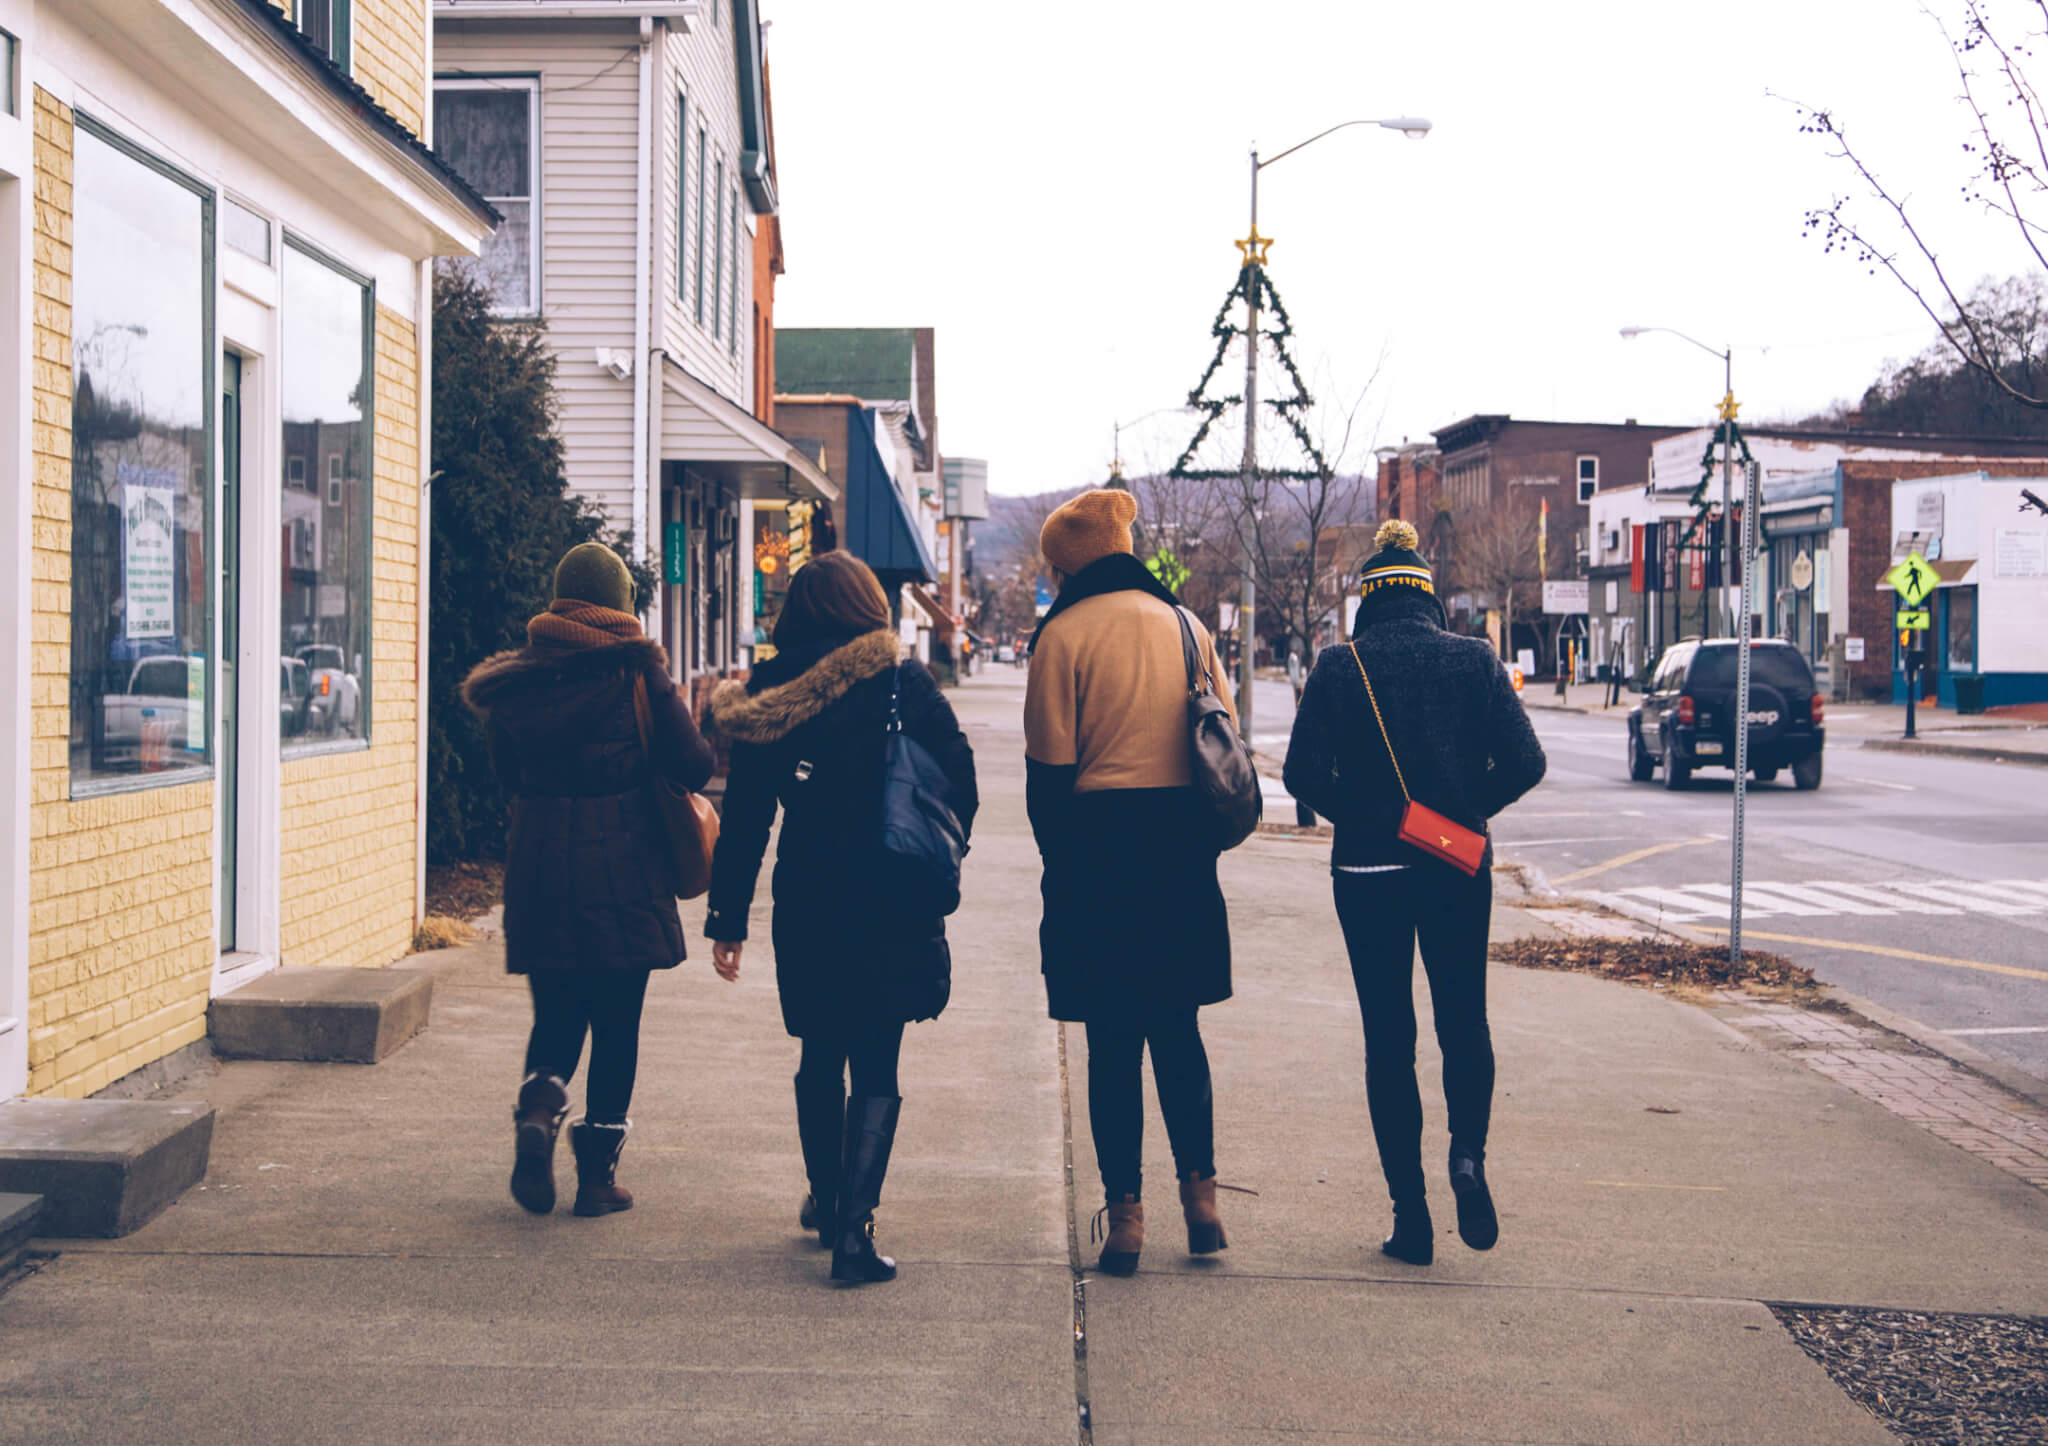 Walking back from brunch in Narrowsburg, New York in the winter to celebrate the New Year | Uno Dos Trae photography